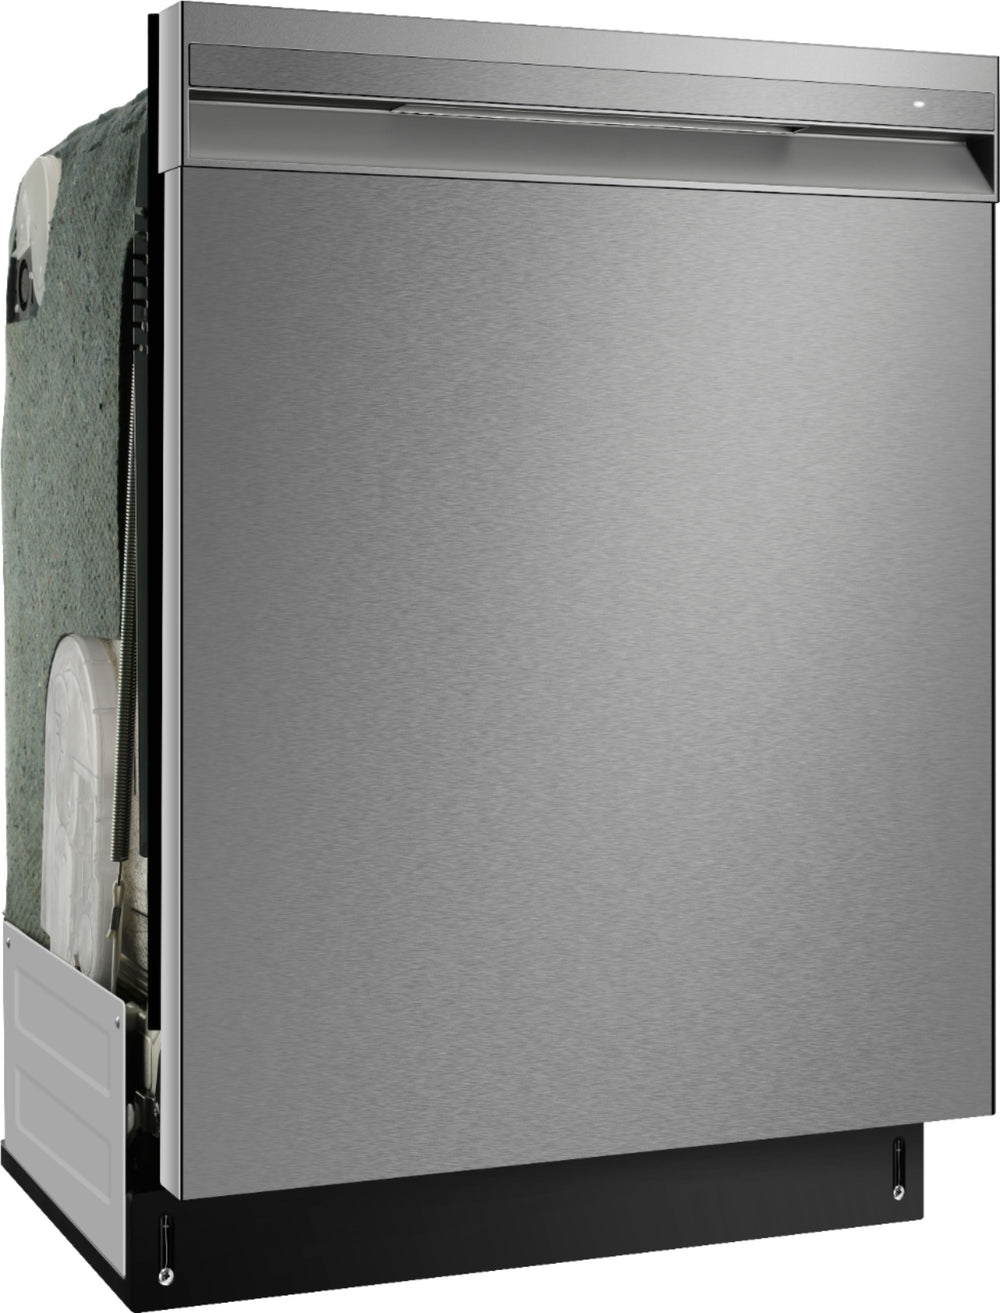 Insignia™ - Top Control Built-In Dishwasher with Recessed Handle - Stainless steel_1